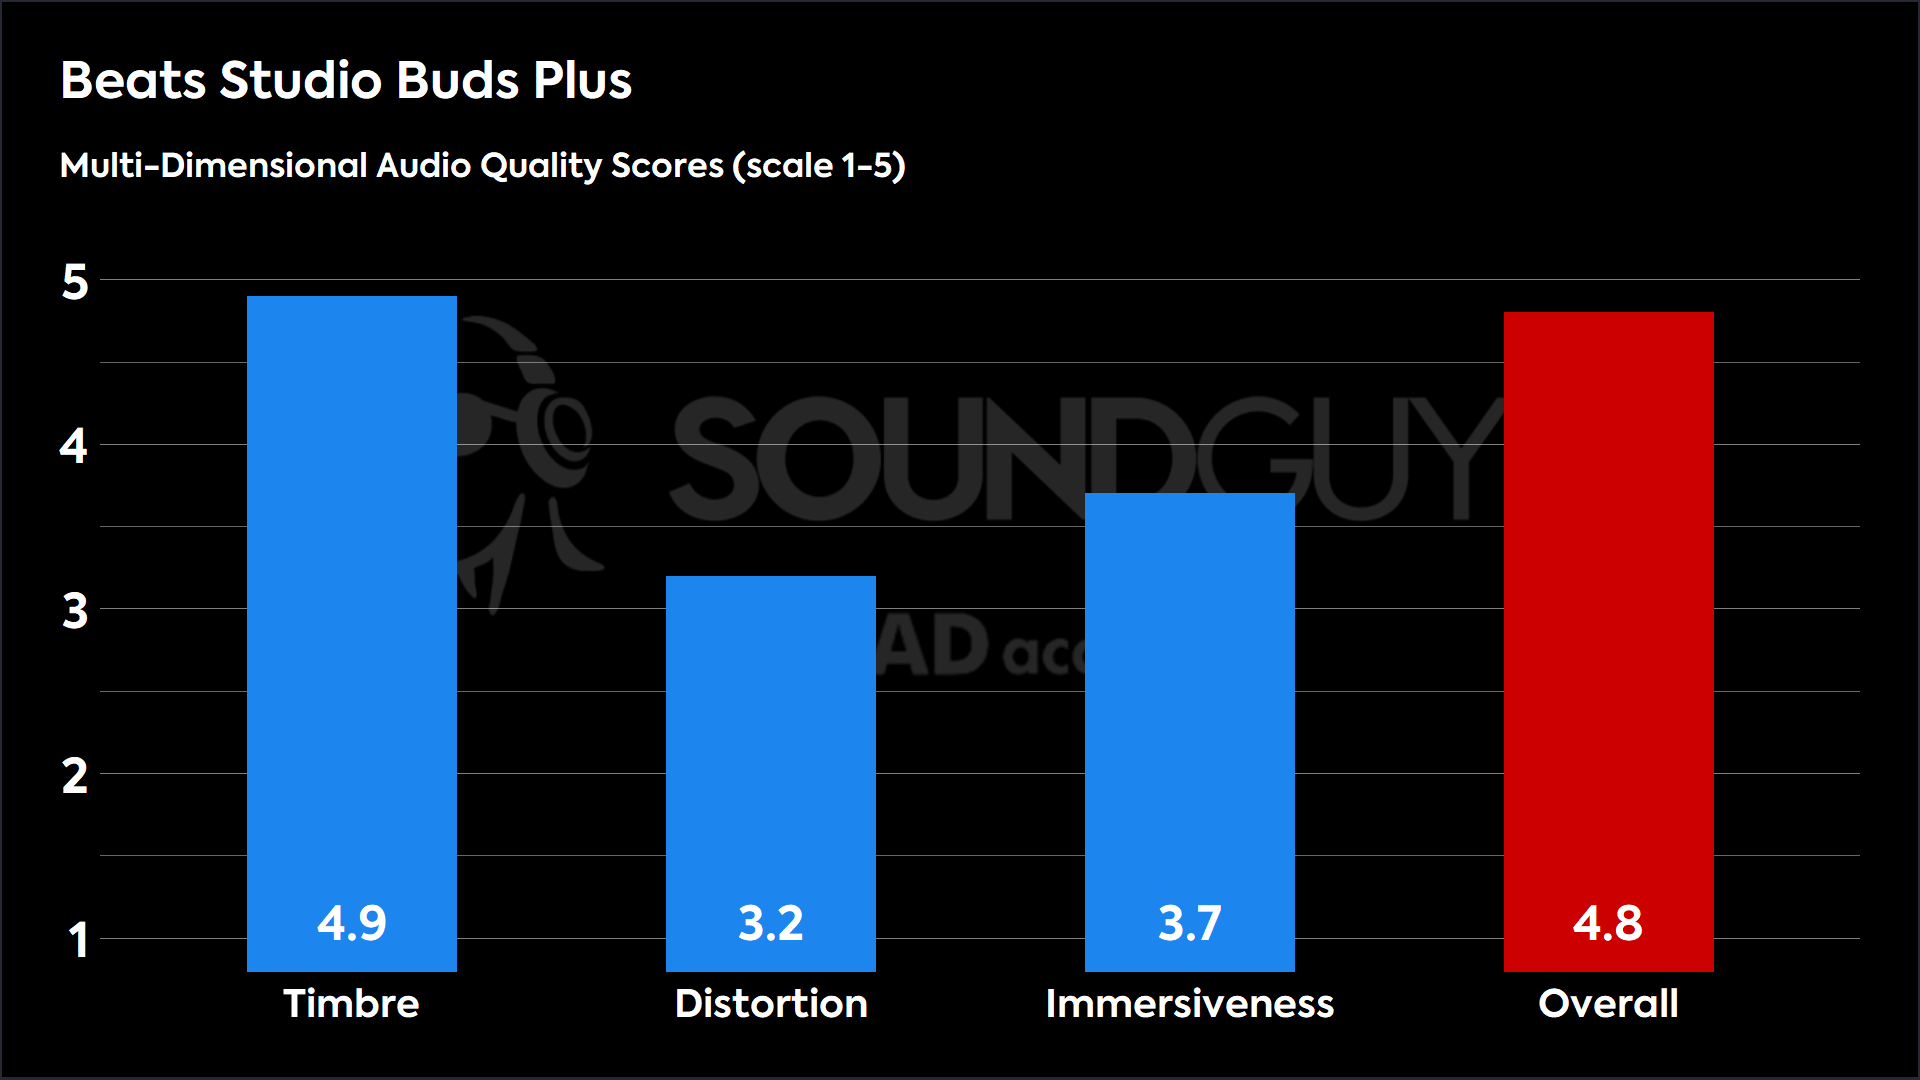 A bar plot showing the Multi-Dimensional Audio Quality Scores for the Beats Studio Buds Plus.